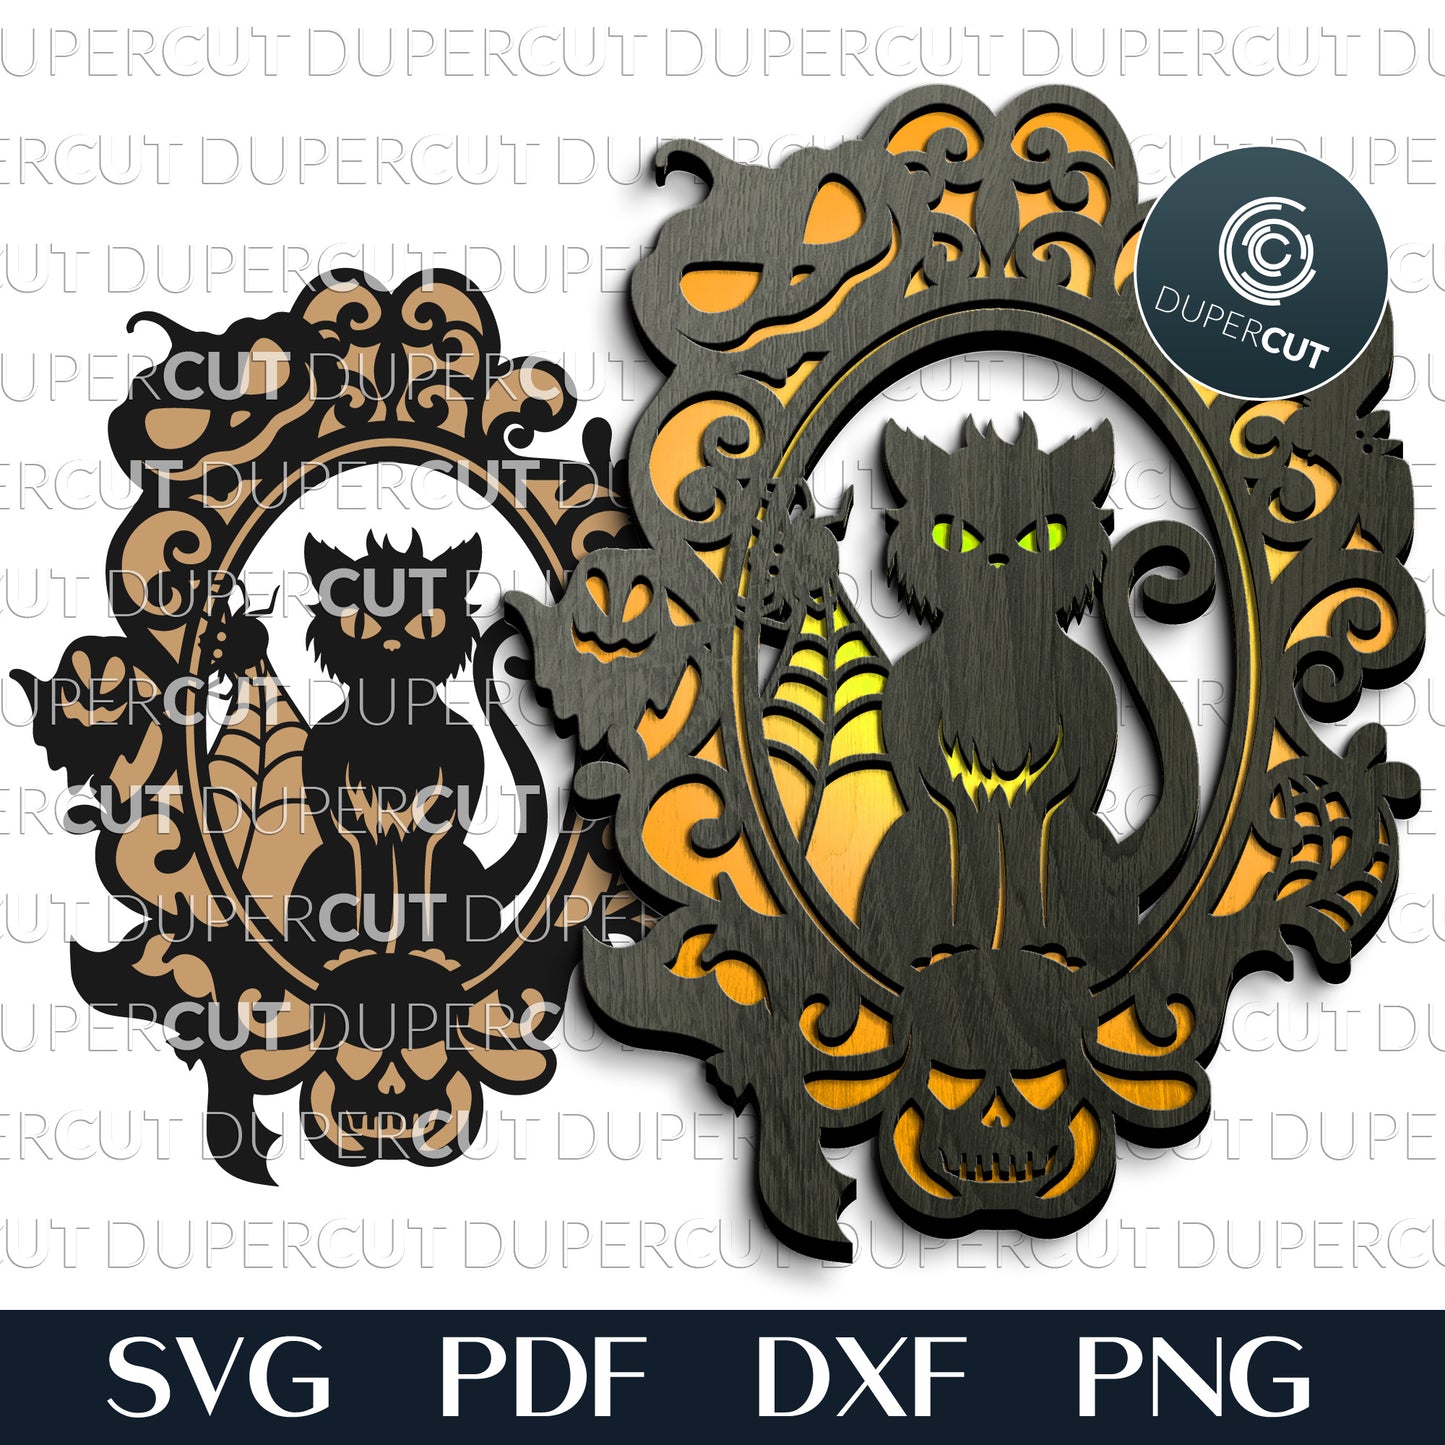 Black Cat Halloween door hanger - SVG PNG DXF layered cutting files for laser machines Glowforge, Cricut, Silhouette, CNC plasma machines by DuperCut